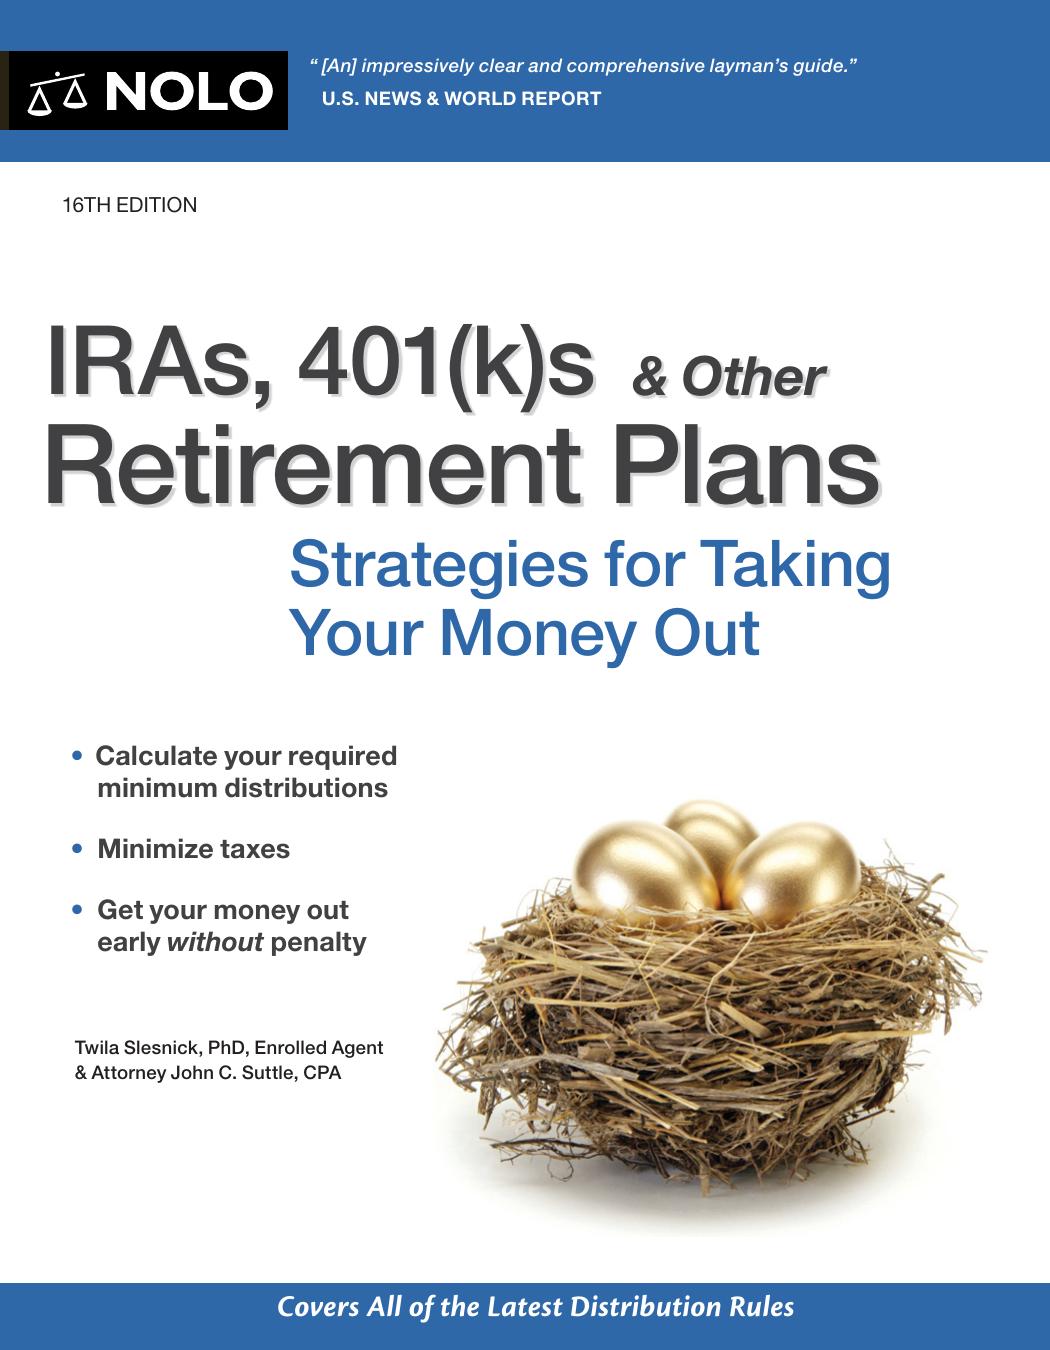 IRAs, 401(k)s & Other Retirement Plans: Strategies for Taking Your Money Out [Team-IRA] (True PDF) by Twila Slesnick PhD Enrolled Agent John C. Suttle Attorney